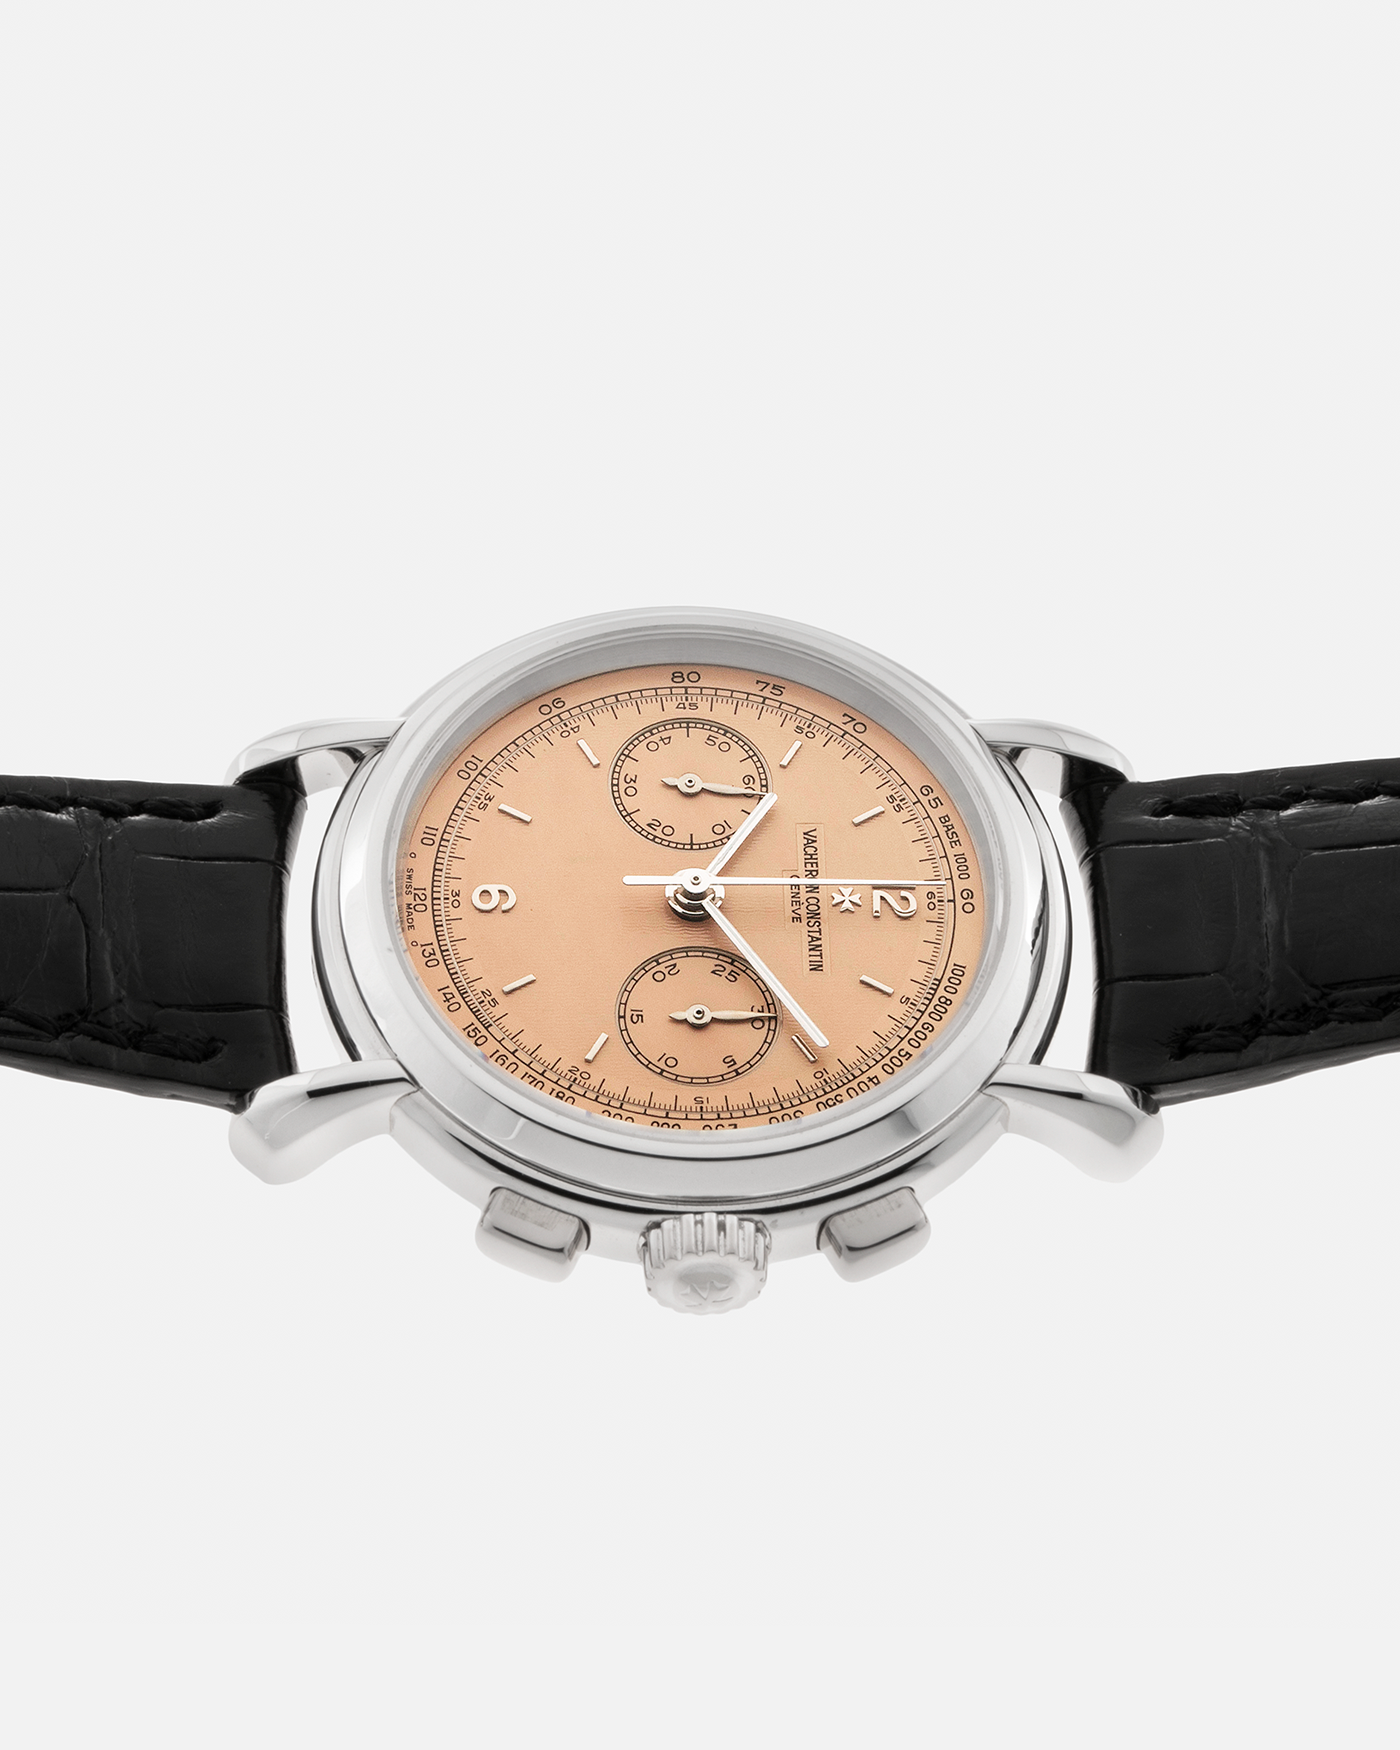 Brand: Vacheron Constantin Year: 1996 Model: Les Historiques Chronograph (Estimated only 60 Examples in this Salmon Dial / Platinum Configuration) Reference Number: 47101/3 Material: Platinum 950 Movement: Lemania 2310 Based Cal. 1140, Manual-Winding Case Diameter: 37mm Lug Width: 18mm Bracelet: Vacheron Constantin Black Alligator Strap and Vacheron Constantin Platinum Tang Buckle